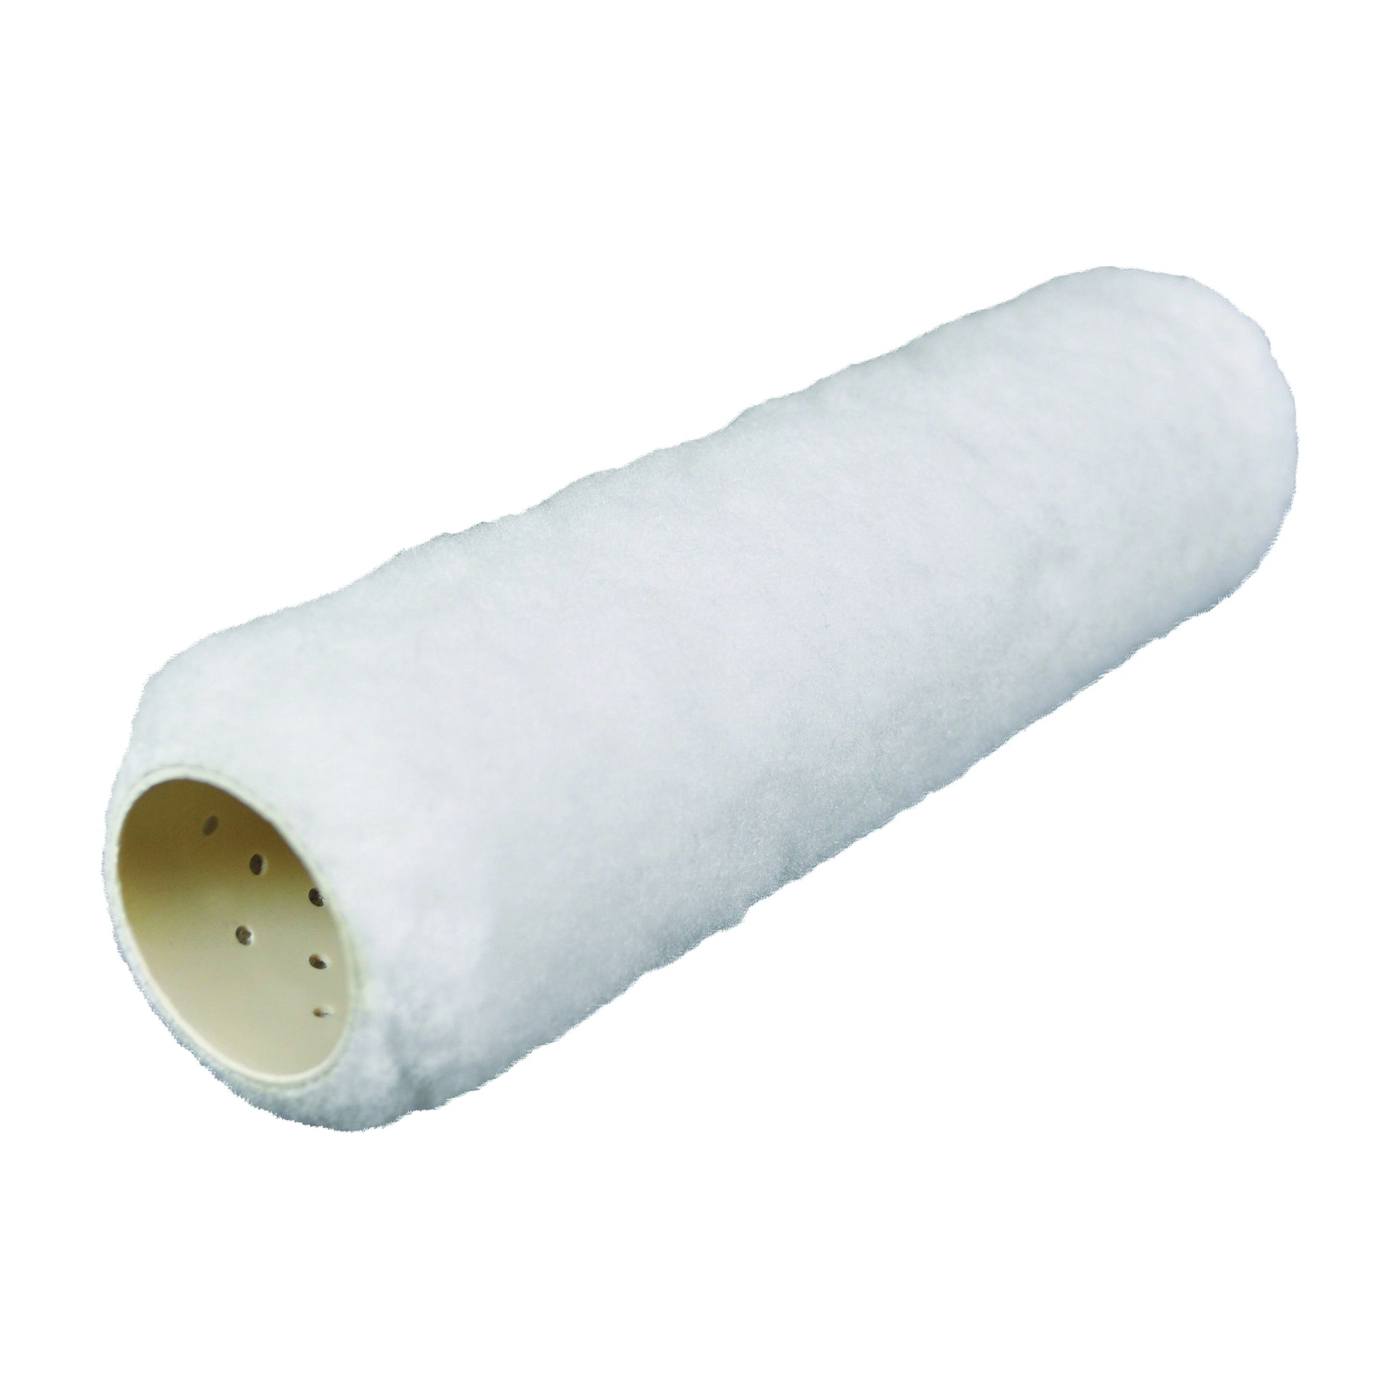 0155206 Paint Roller Cover, 3/8 in Thick Nap, 9 in L, Synthetic Cover